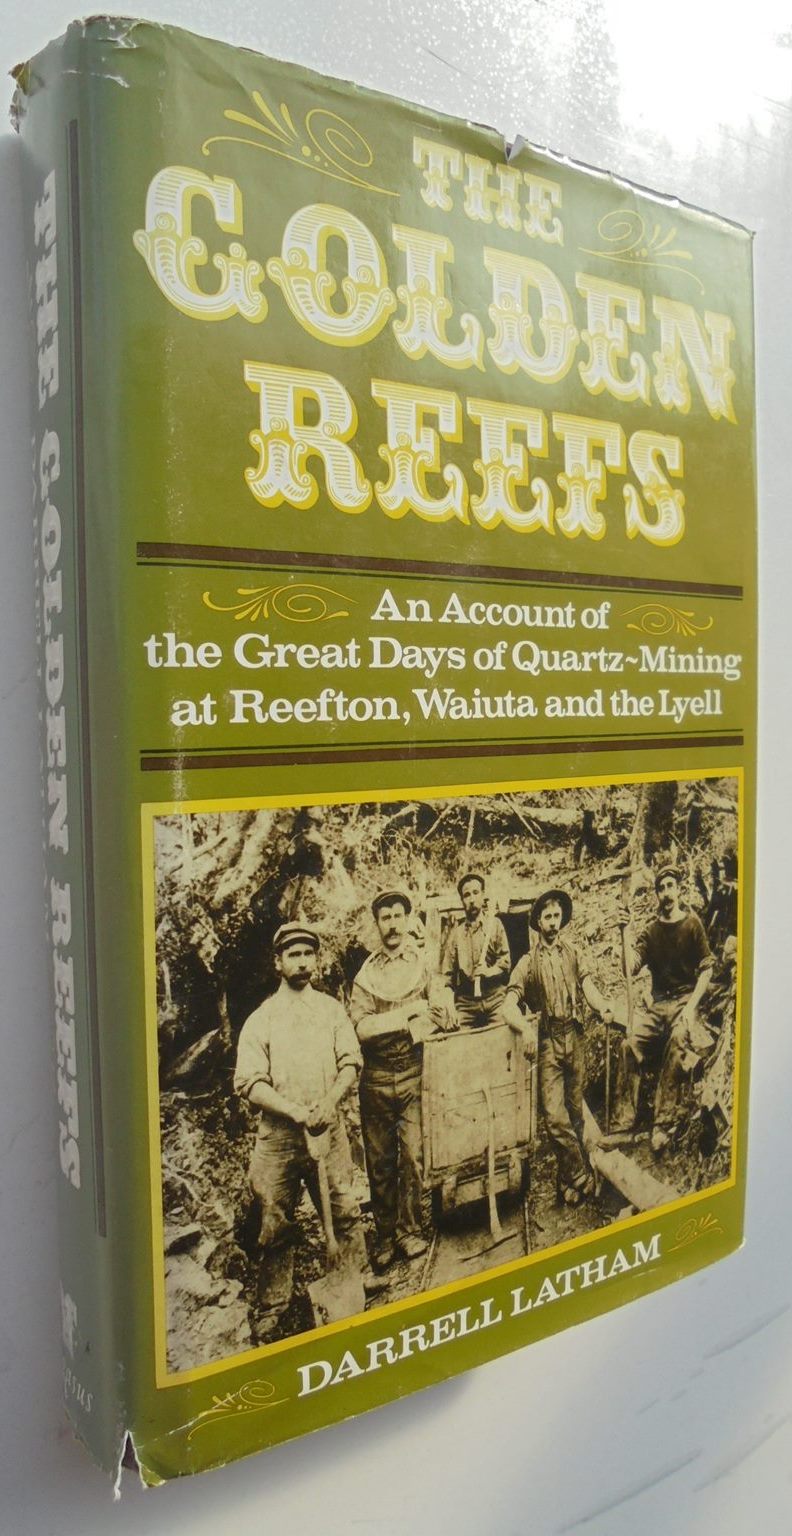 The Golden Reefs: An Account of the Great Days of Quartz-mining - by Darrell Latham. [Signed First Edition]